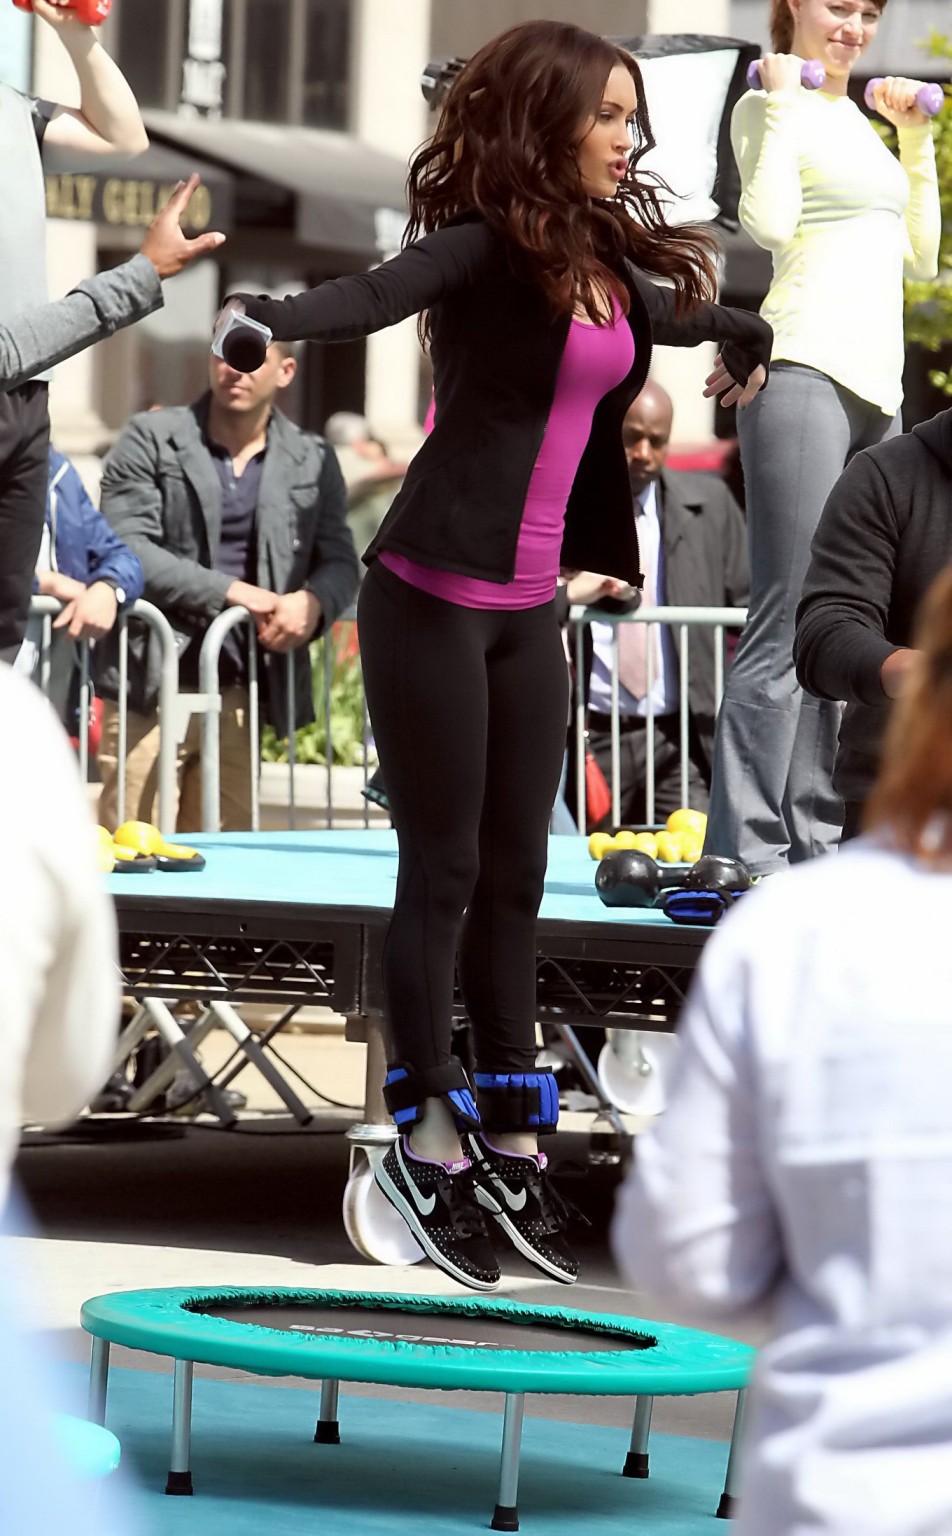 Megan Fox cleavy wearing tight outfit while jumps on trampoline at the TMNT set #75233011